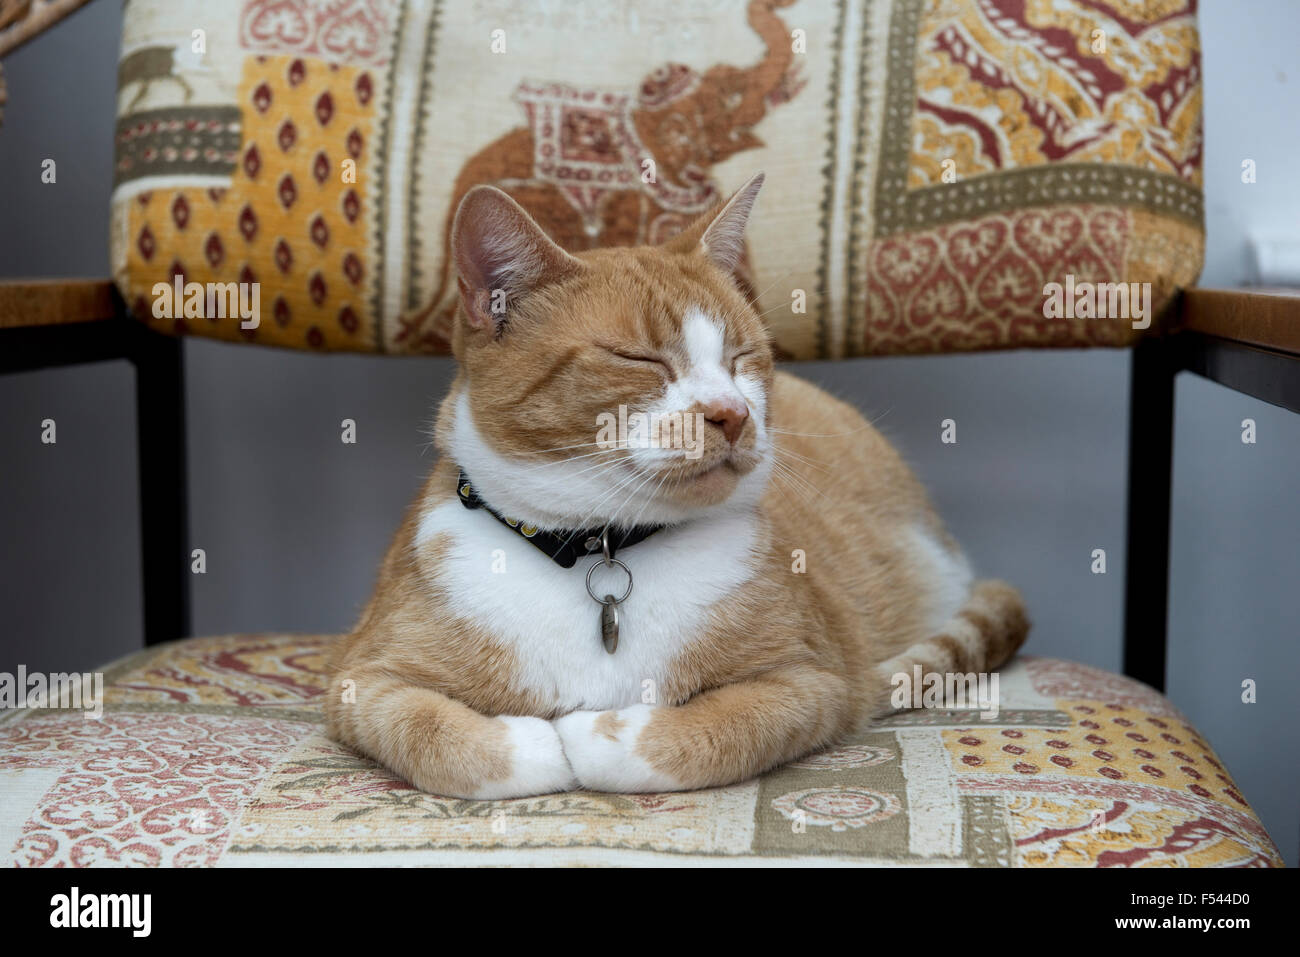 A ginger or marmalade domestic pet cat contentedly sitting on a chair with her eyes closed and paws folded Stock Photo